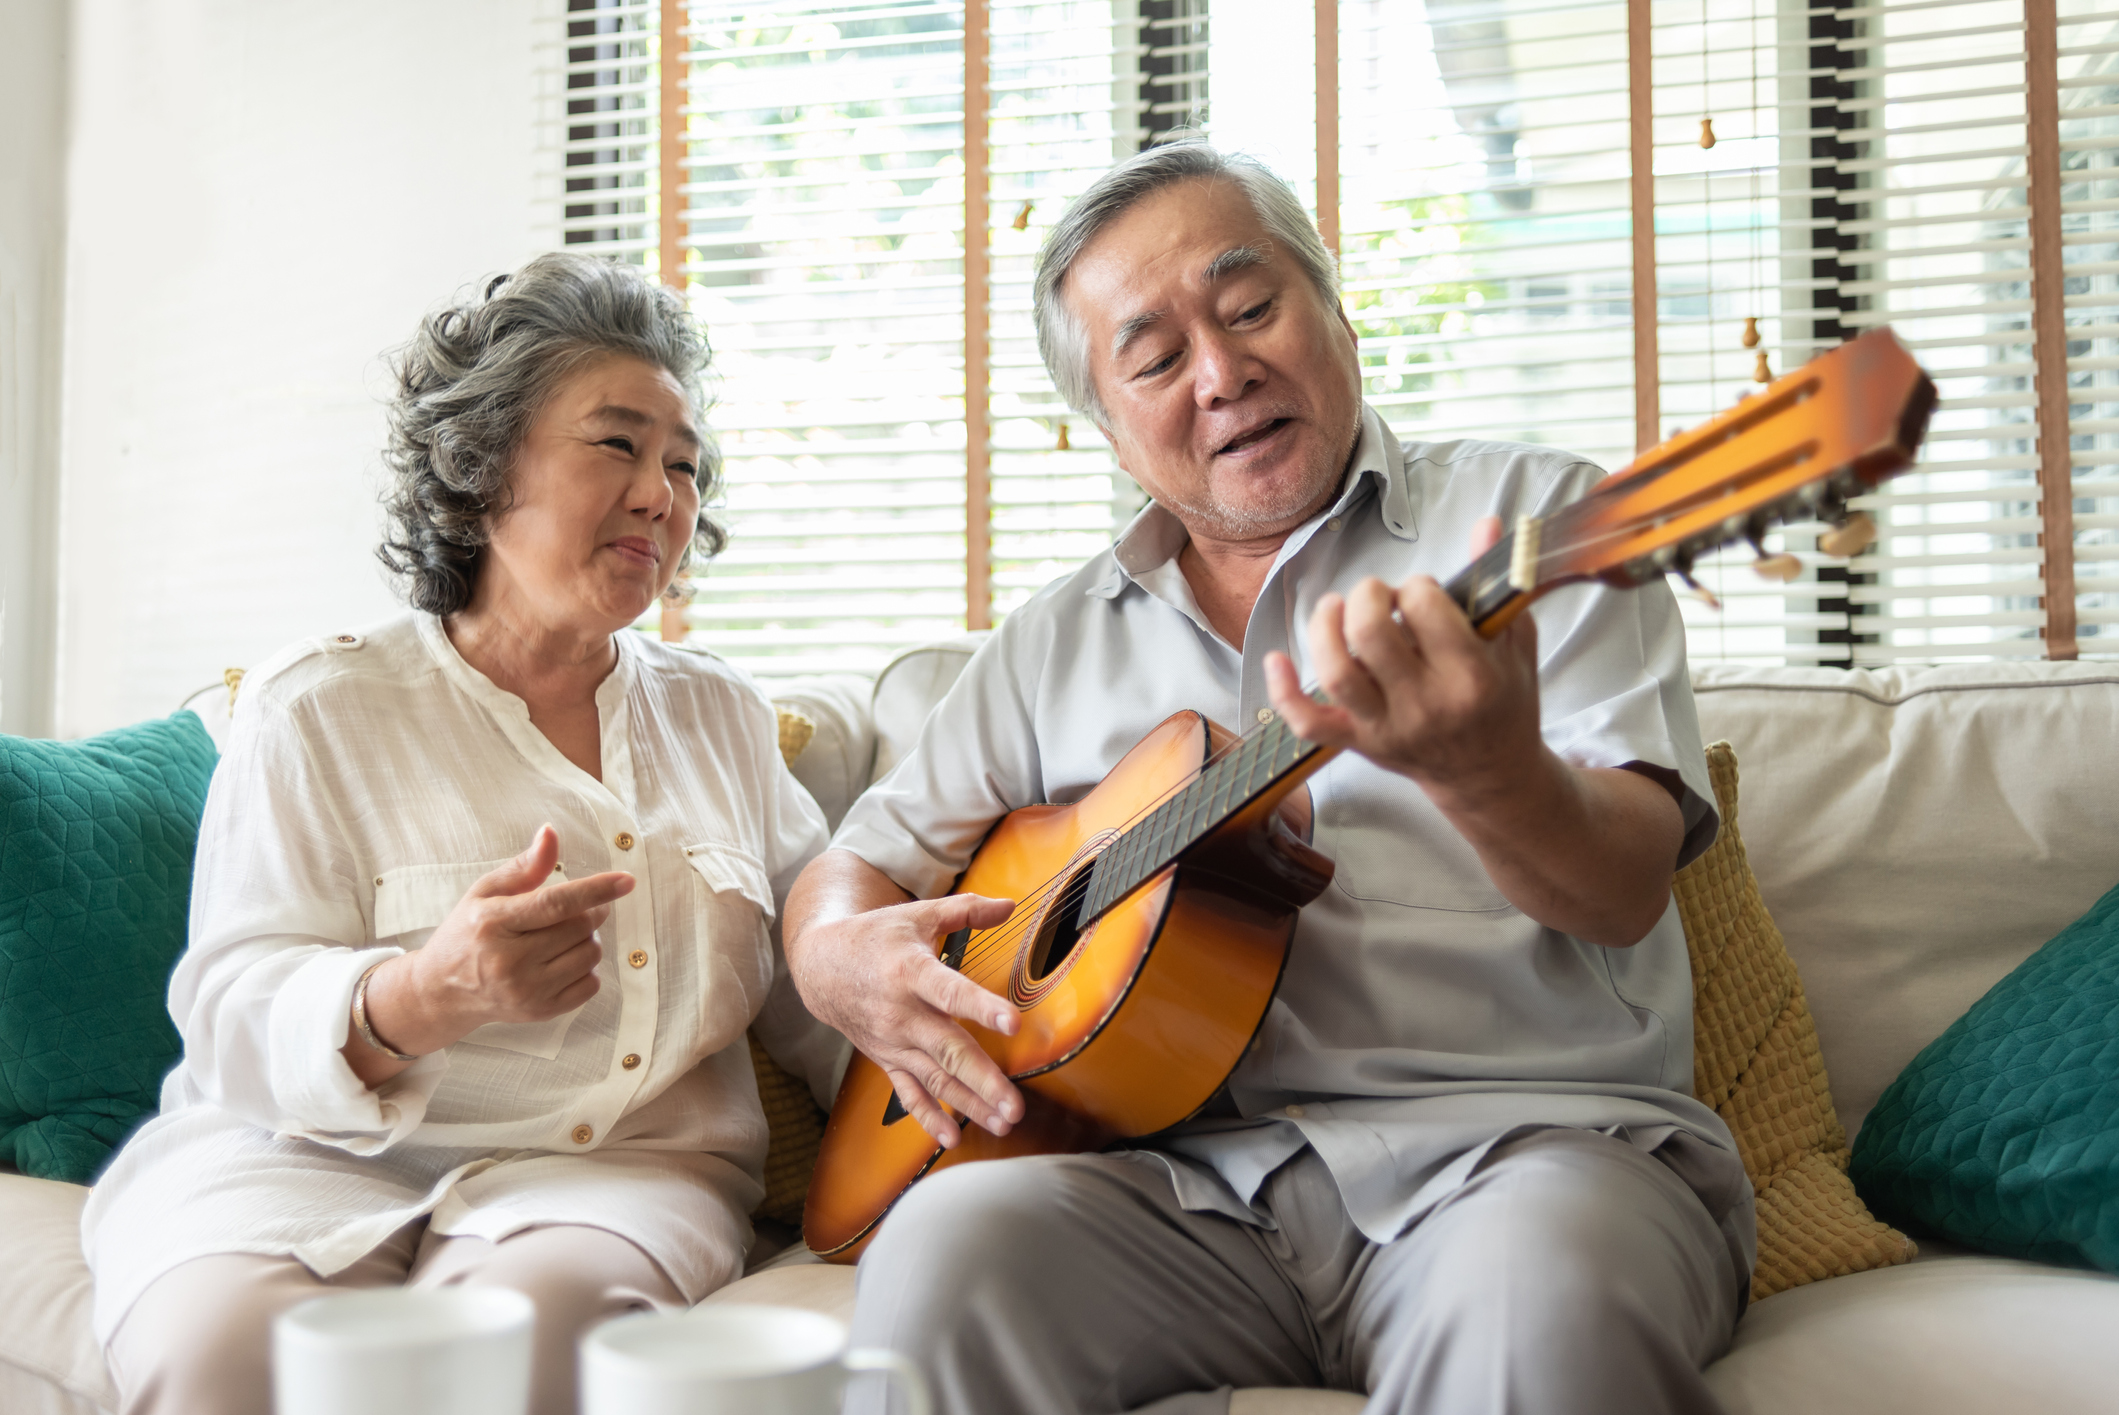 Photograph of senior couple playing guitar on a couch